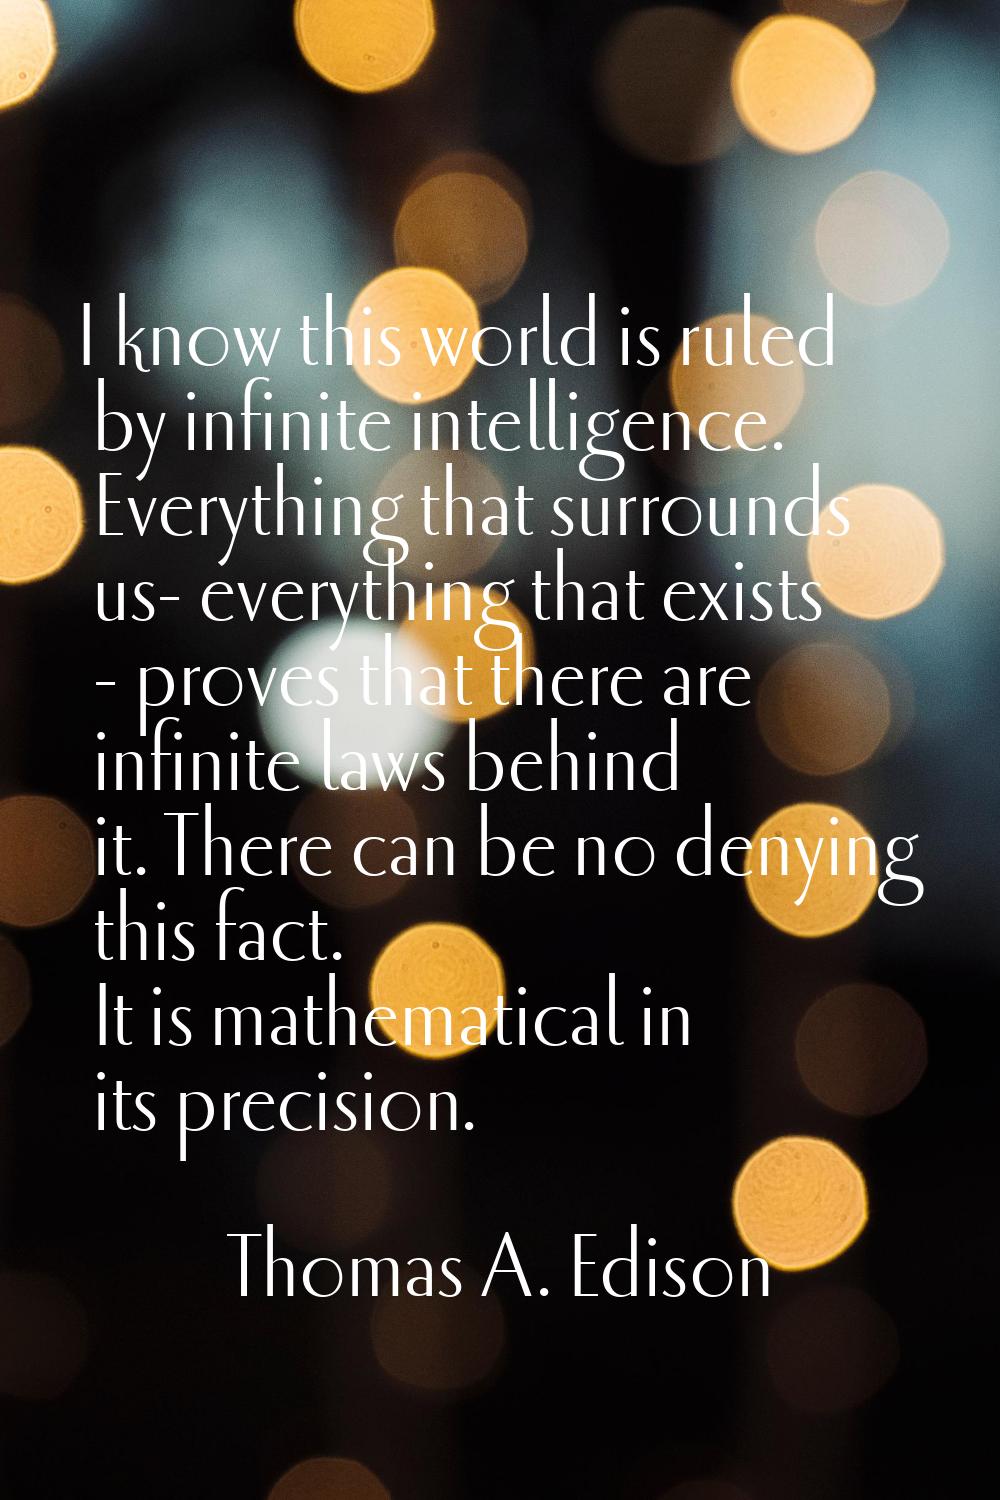 I know this world is ruled by infinite intelligence. Everything that surrounds us- everything that 